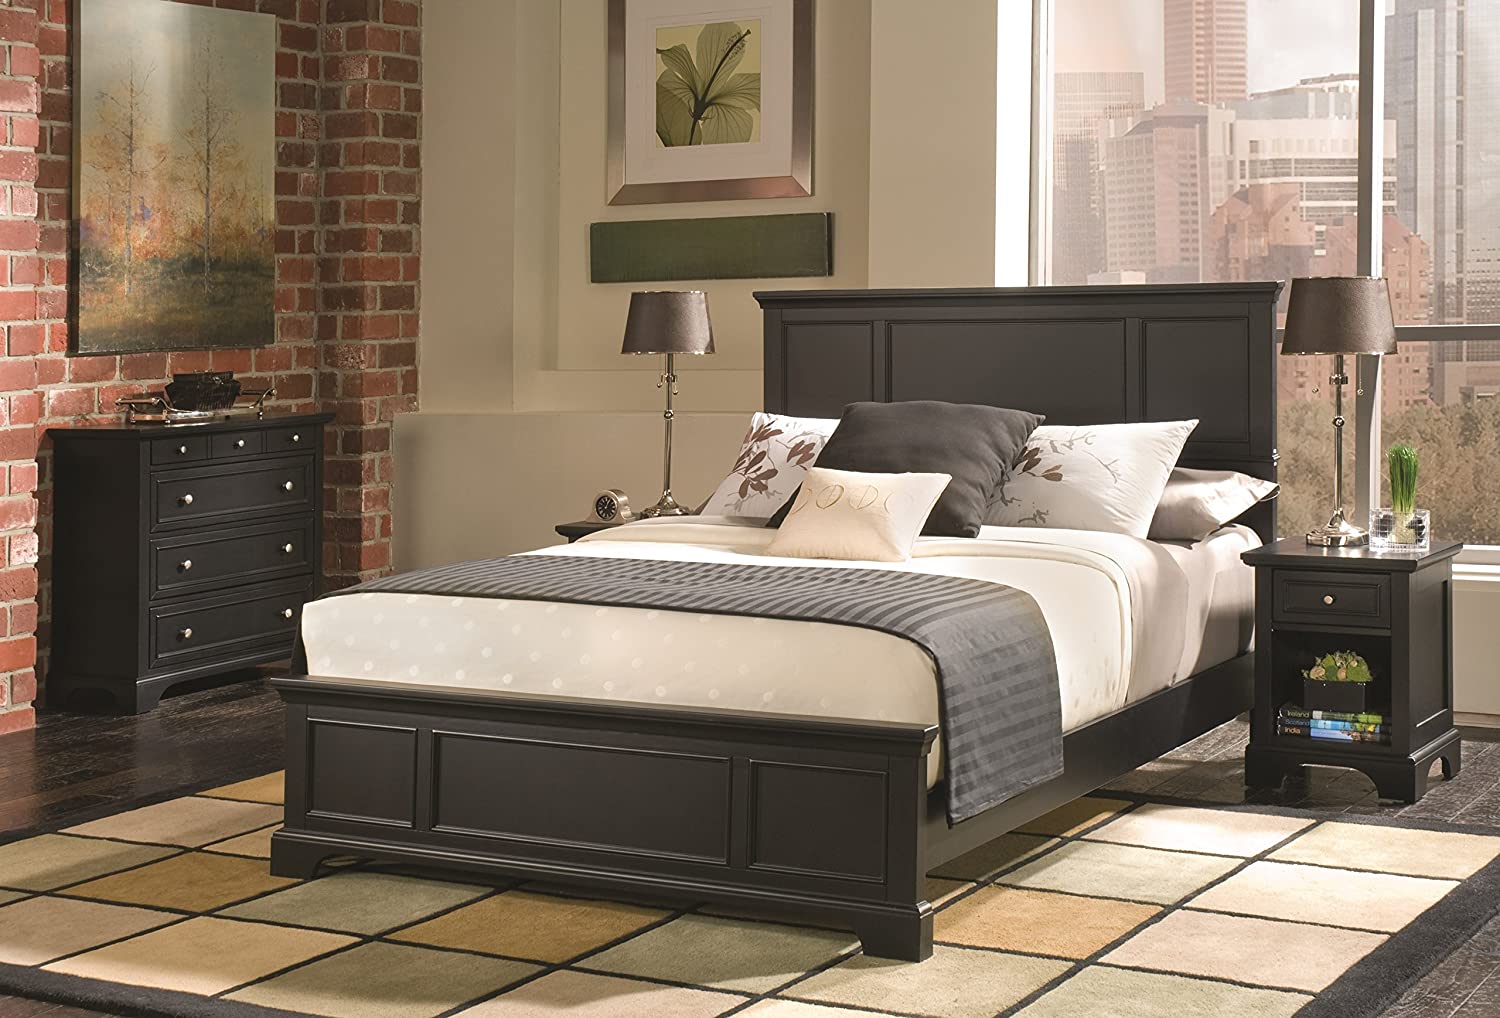 cheap place to get bedroom furniture